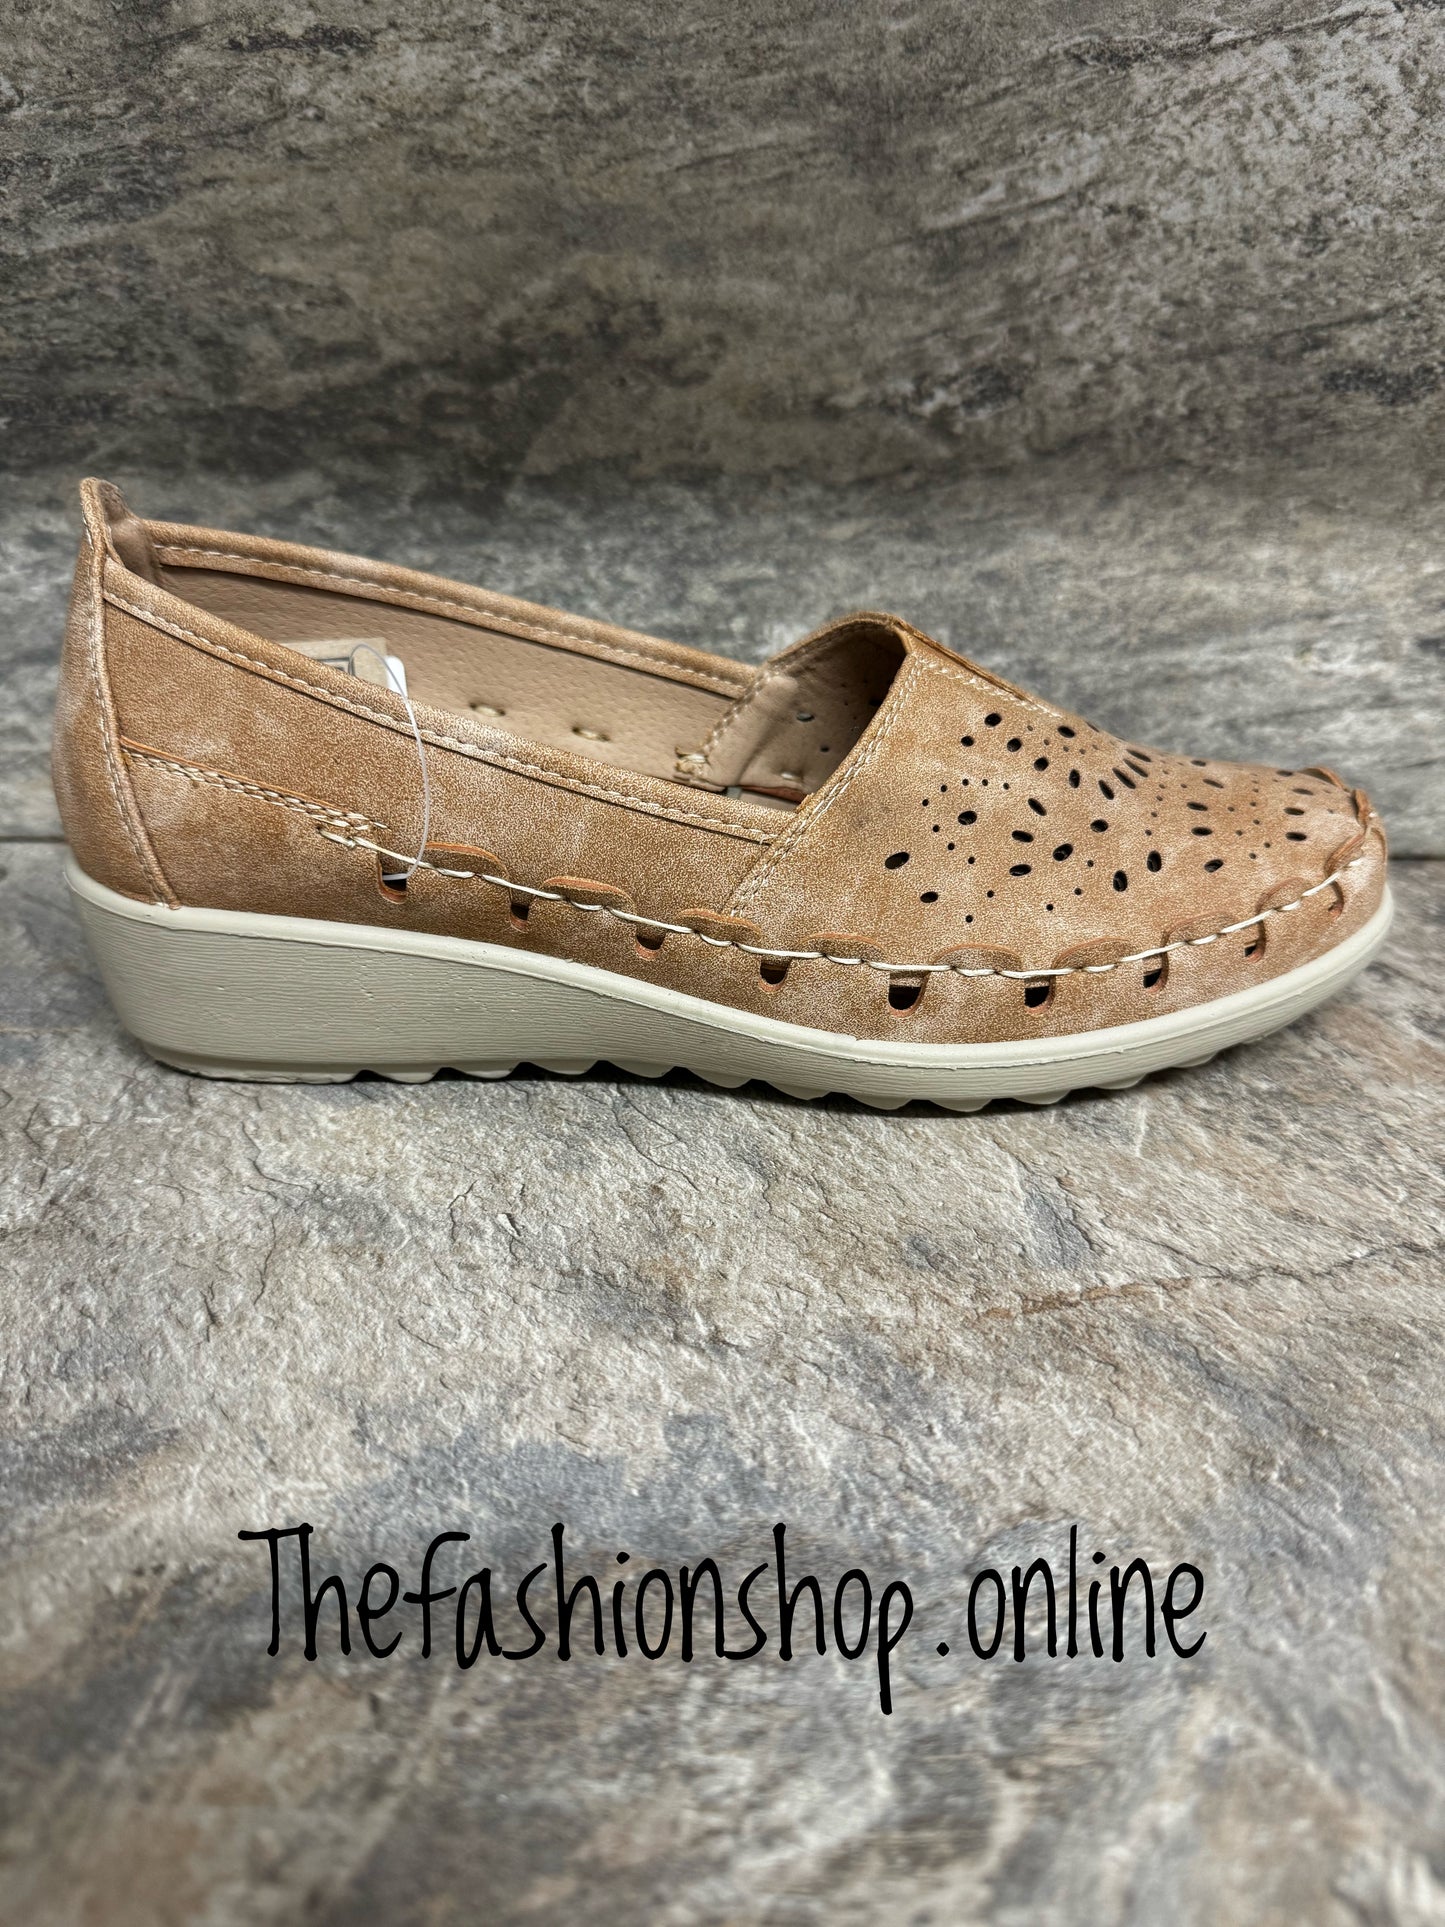 Cushion-walk Lucy camel wide fit summer shoe sizes 3-8